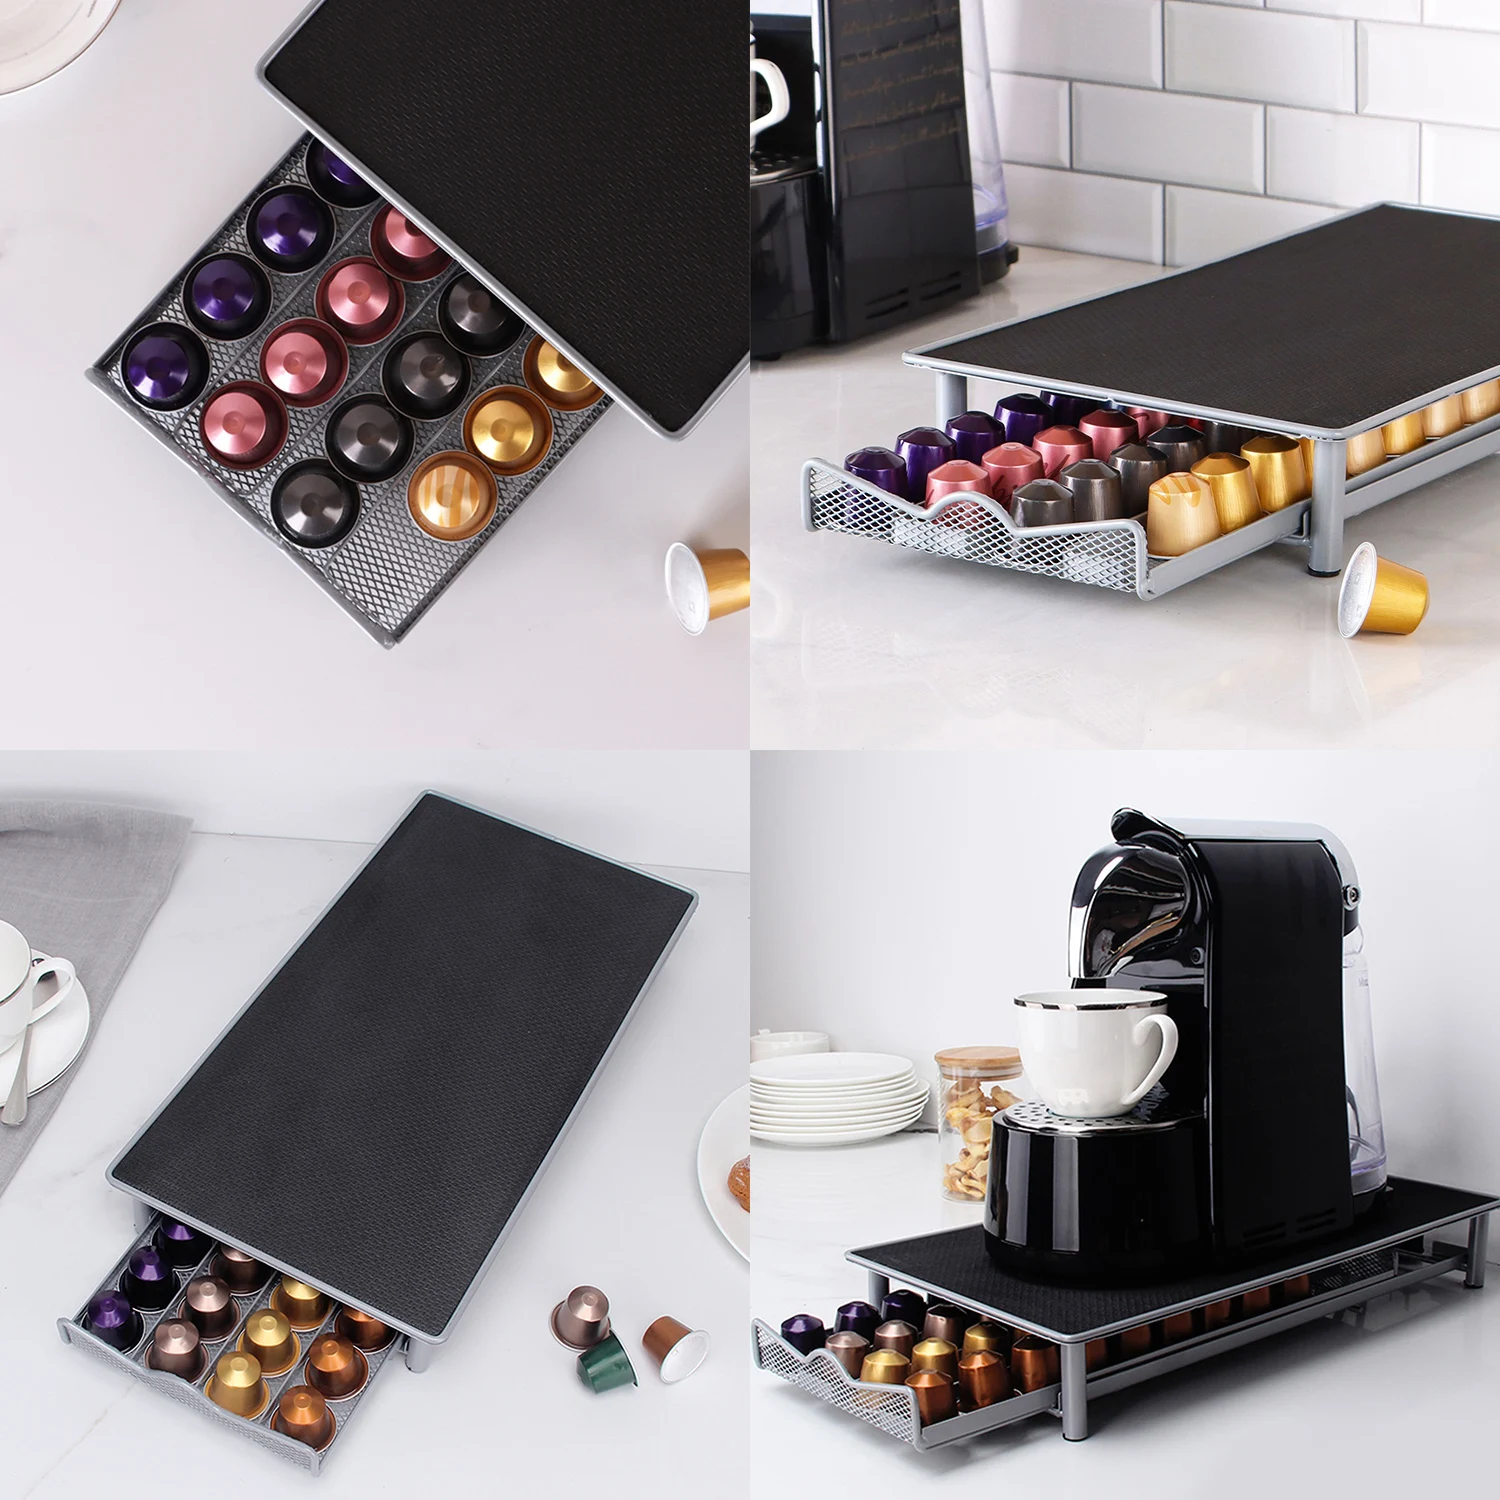 https://ae01.alicdn.com/kf/S6dc22bd46ef142fd9aab260a40ed41b1I/40-Pods-Coffee-Capsules-Holder-Coffee-Shelves-Organizer-Drawer-Type-Storage-Stand-Rack-Practical.jpg